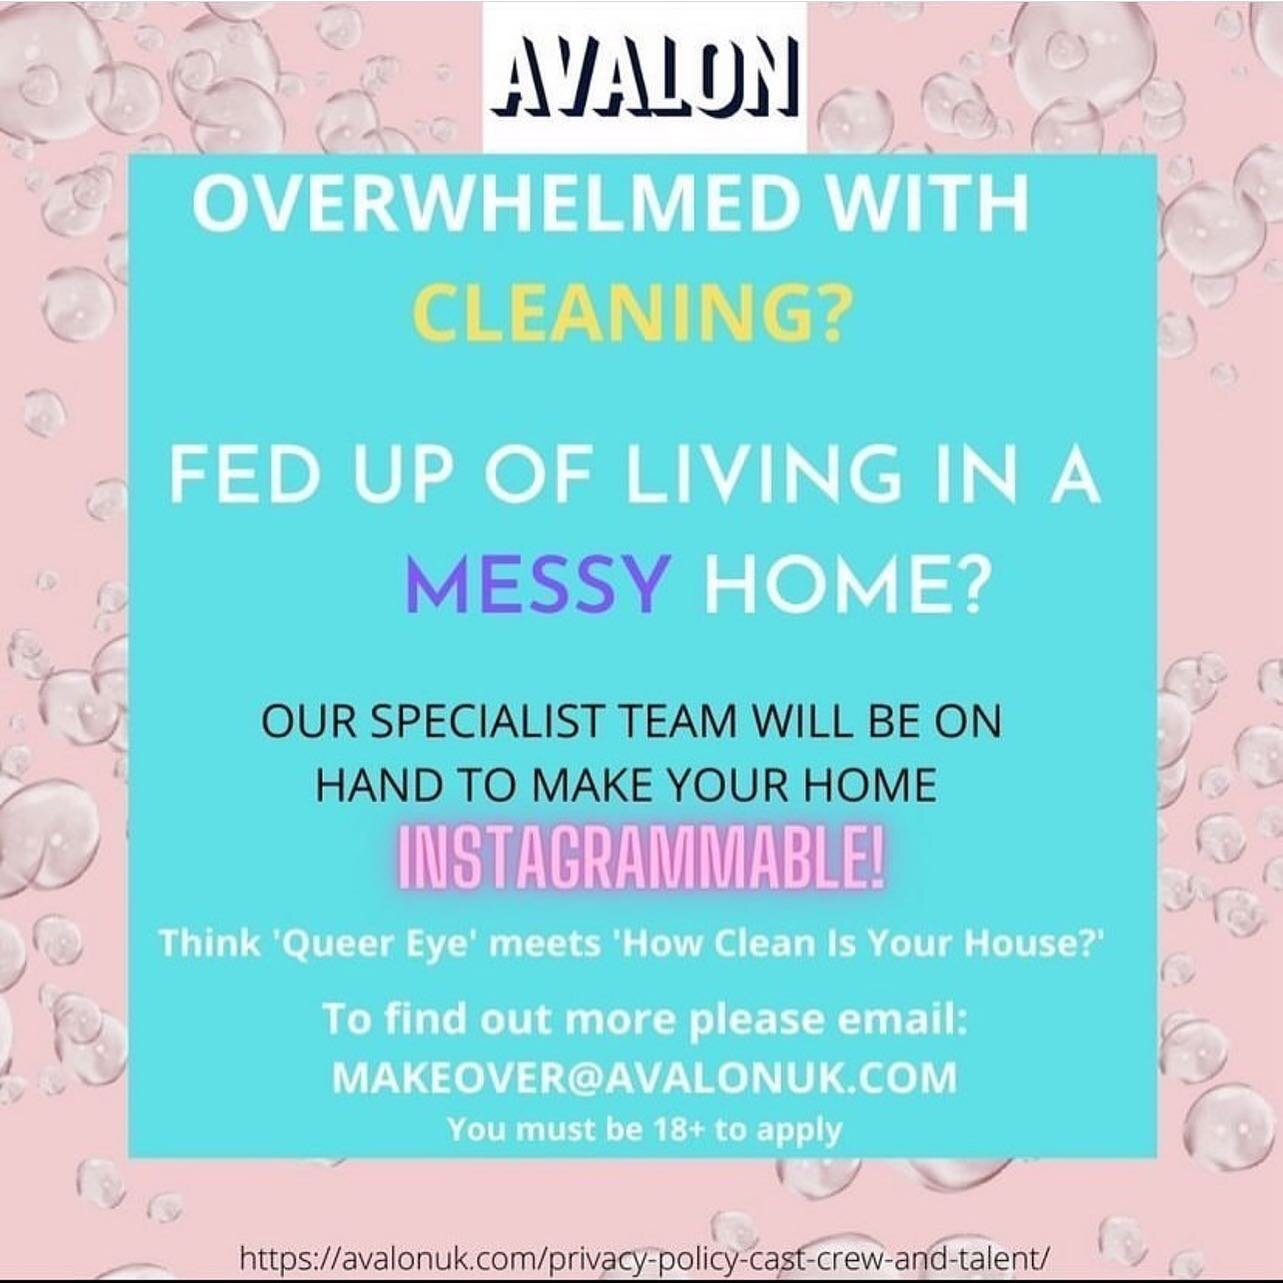 ** UK - TV CASTING **
AVALON looking for participants that are overwhelmed with cleaning in their messy home and want help! Get in touch now with the details on the flyer.